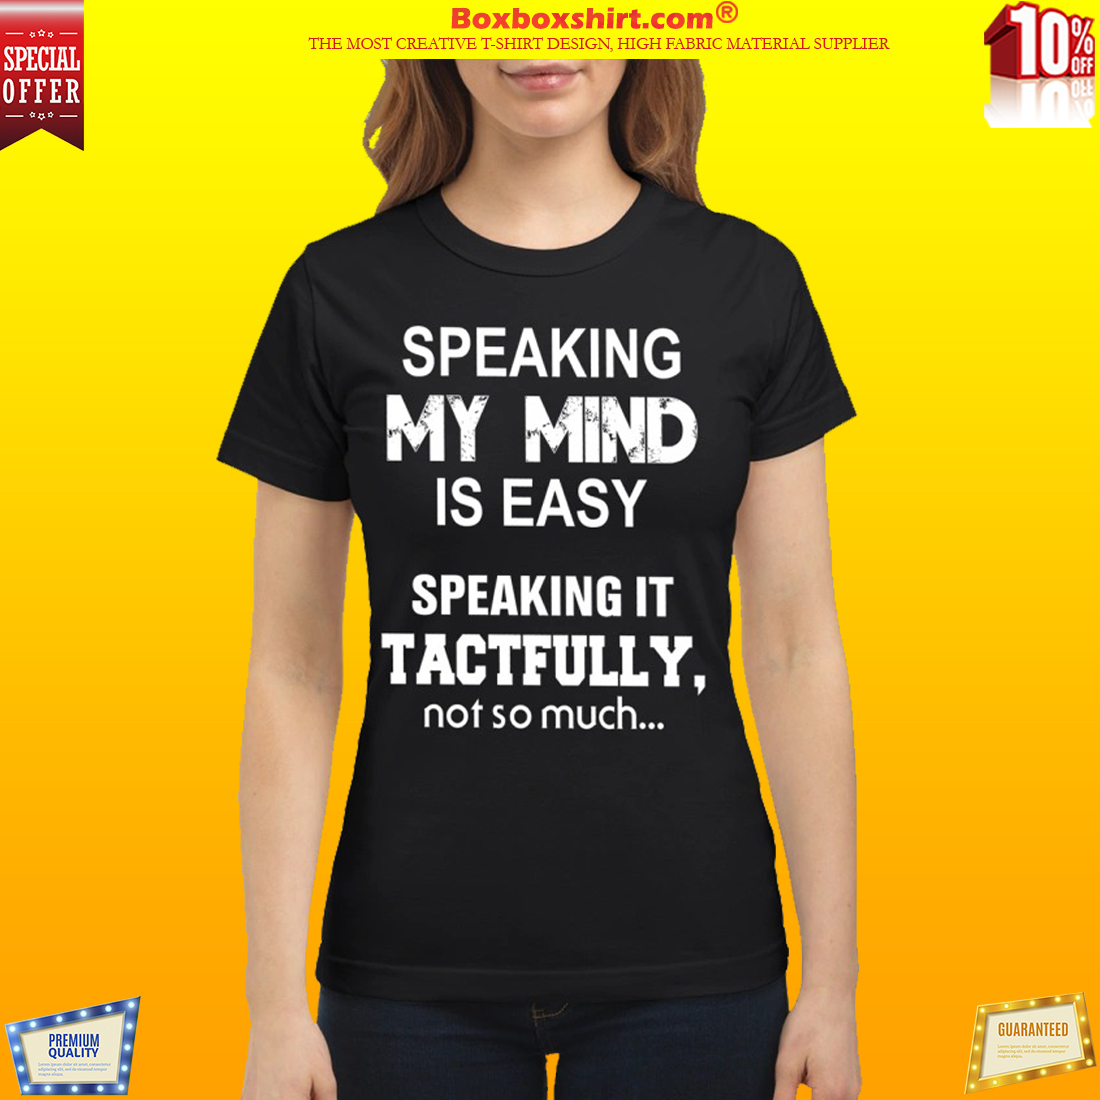 Speaking my mind is easy speaking it tactfully not so much classic shirt